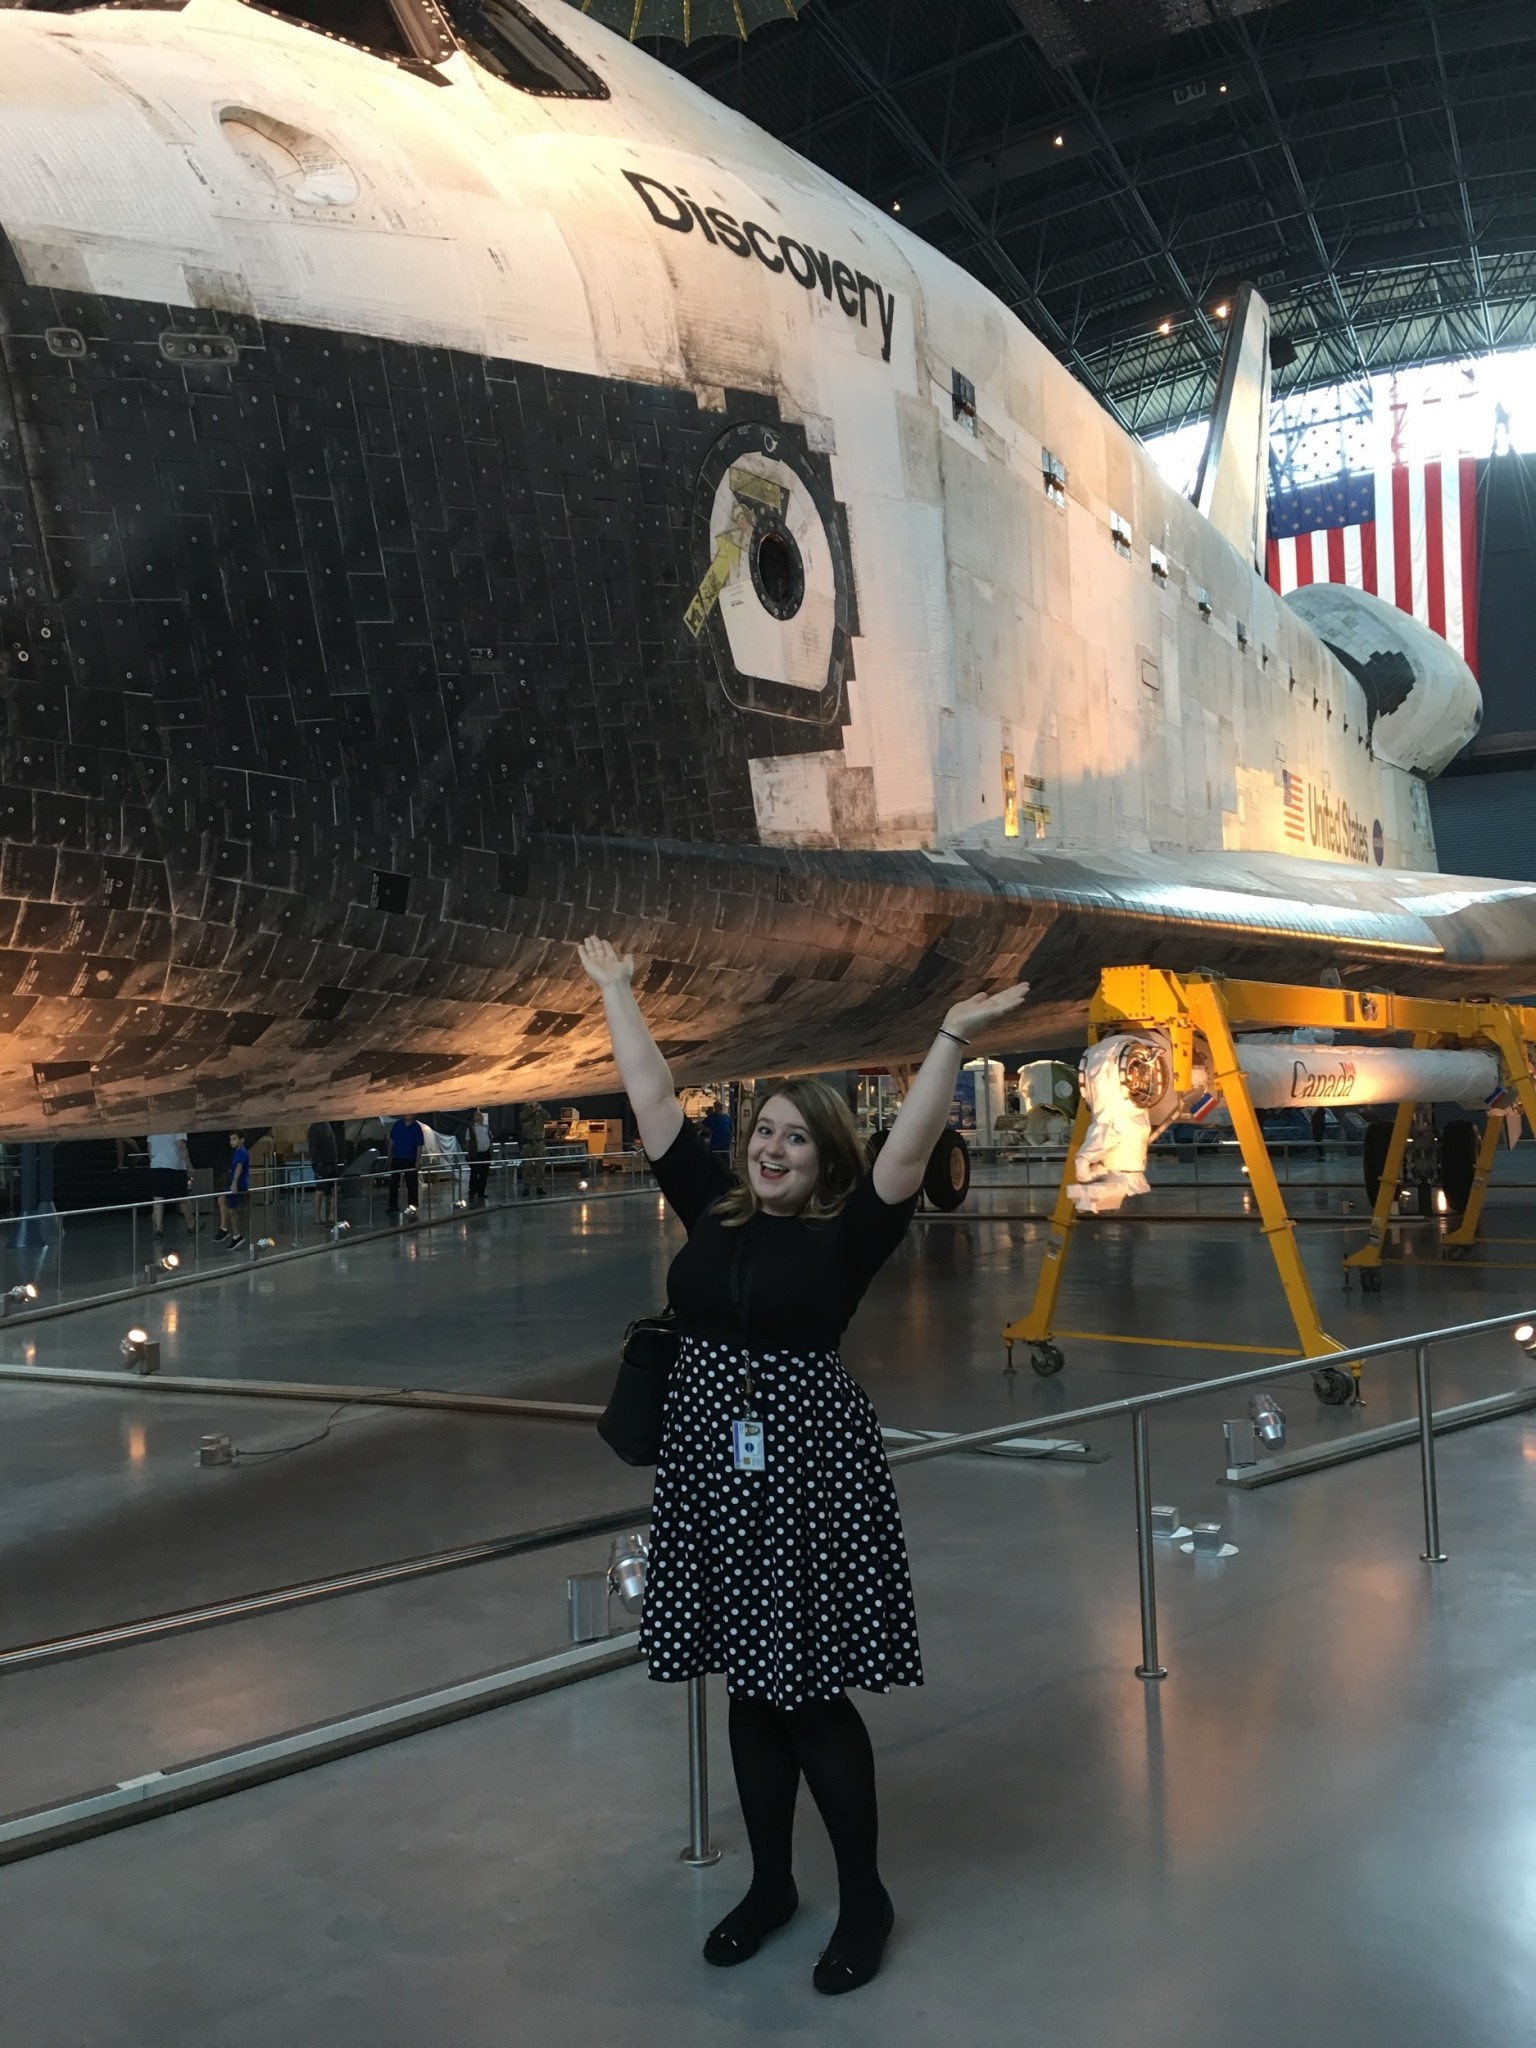 woman with shoulder length brown blonde hair wears a black and white polka dot skirt with a short sleeved black shirt has her arms up and is smiling in front of the Space Shuttle, "Discovery"